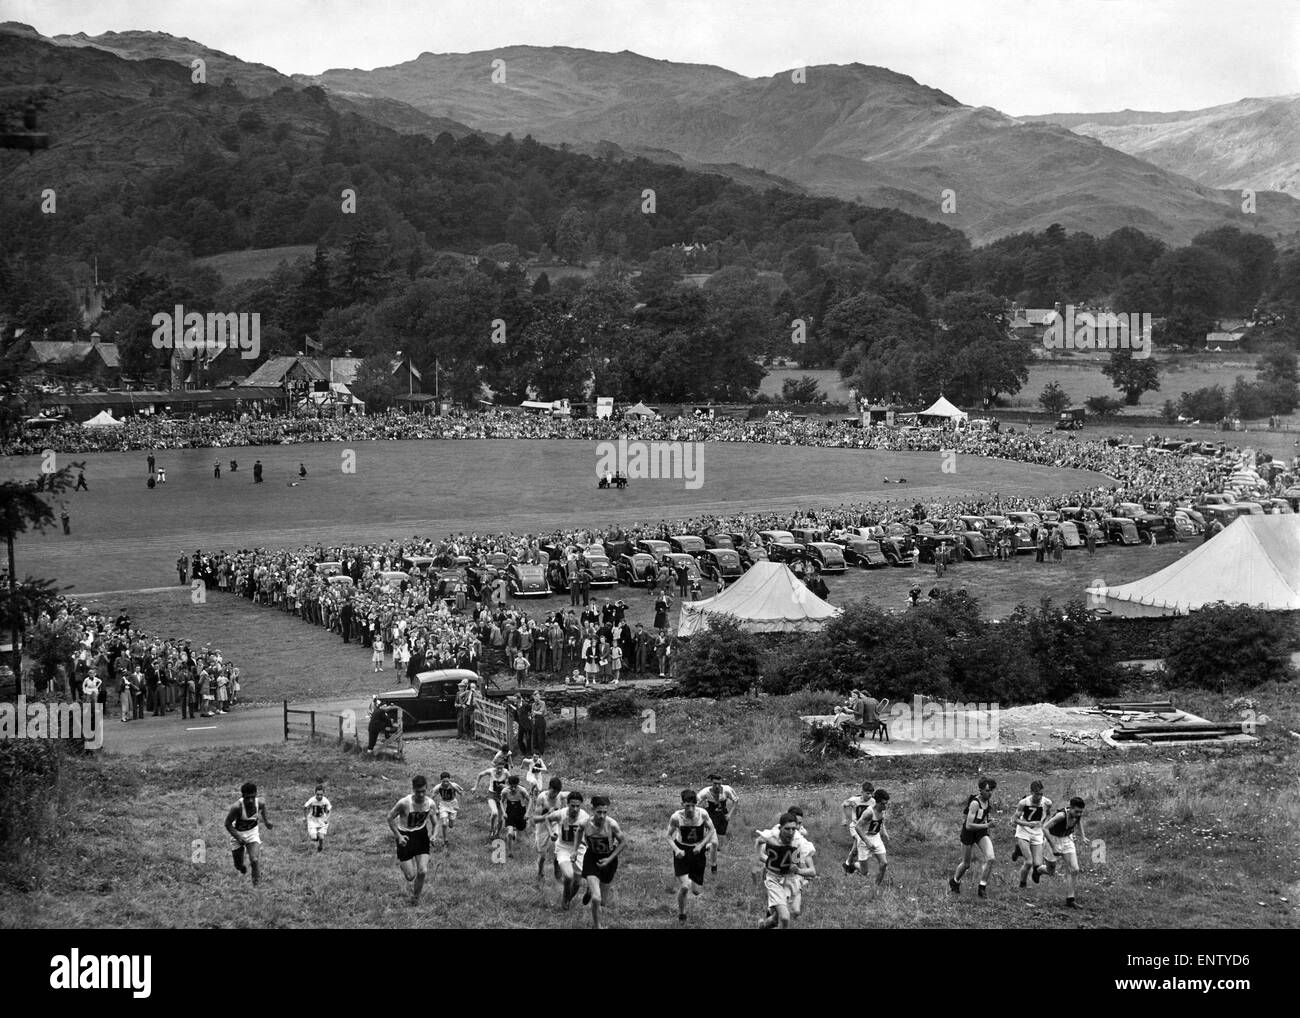 Grasmere Sportsand Show 1951. The Juvenile Guides race, the runners have just left the arena in the background and are making the ascent, to the top of the mountain turn around a flag and decend, at a fast running speed. August 1951 P002552 Stock Photo